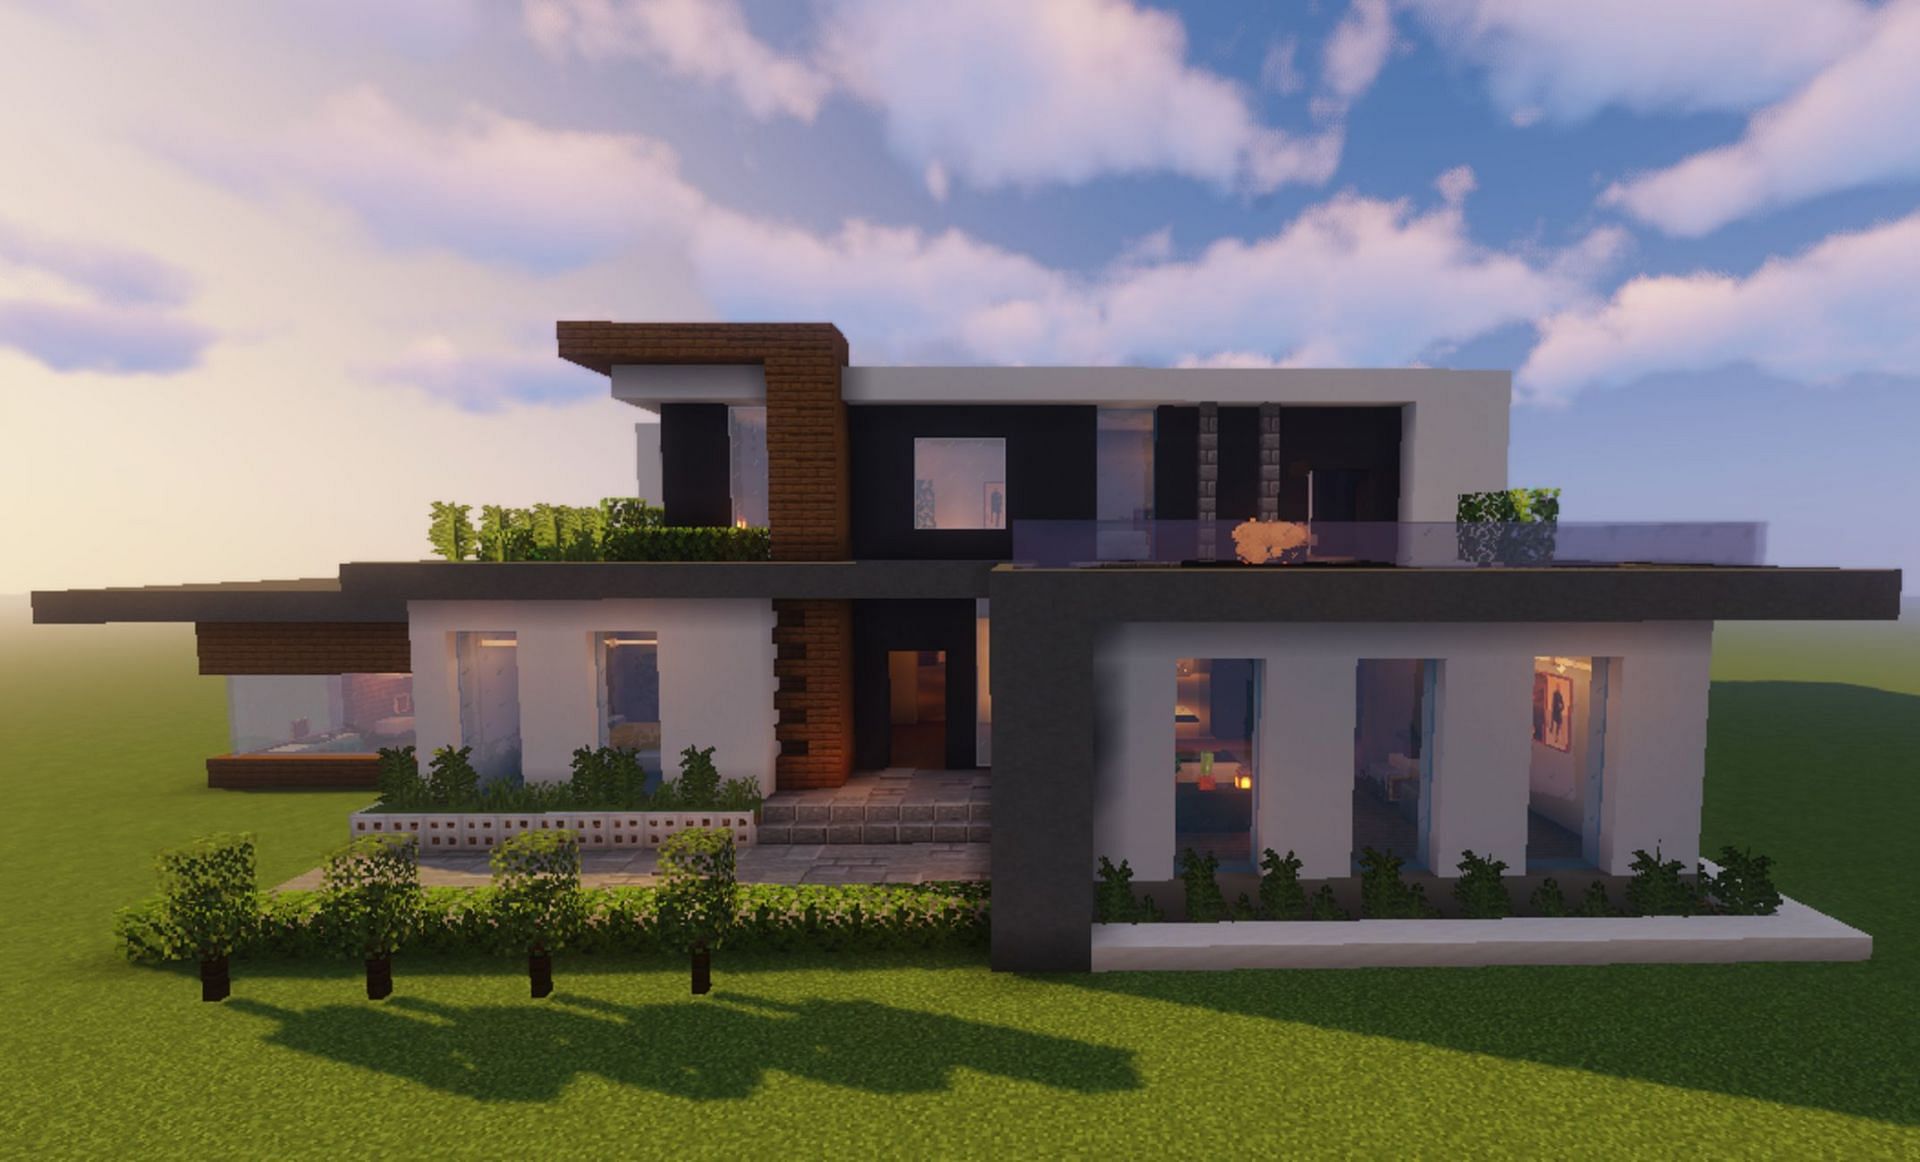 This home incorporates a modern aesthetic with a pleasing wooden interior and porch deck (Image via BunnyLeaf/PlanetMinecraft)